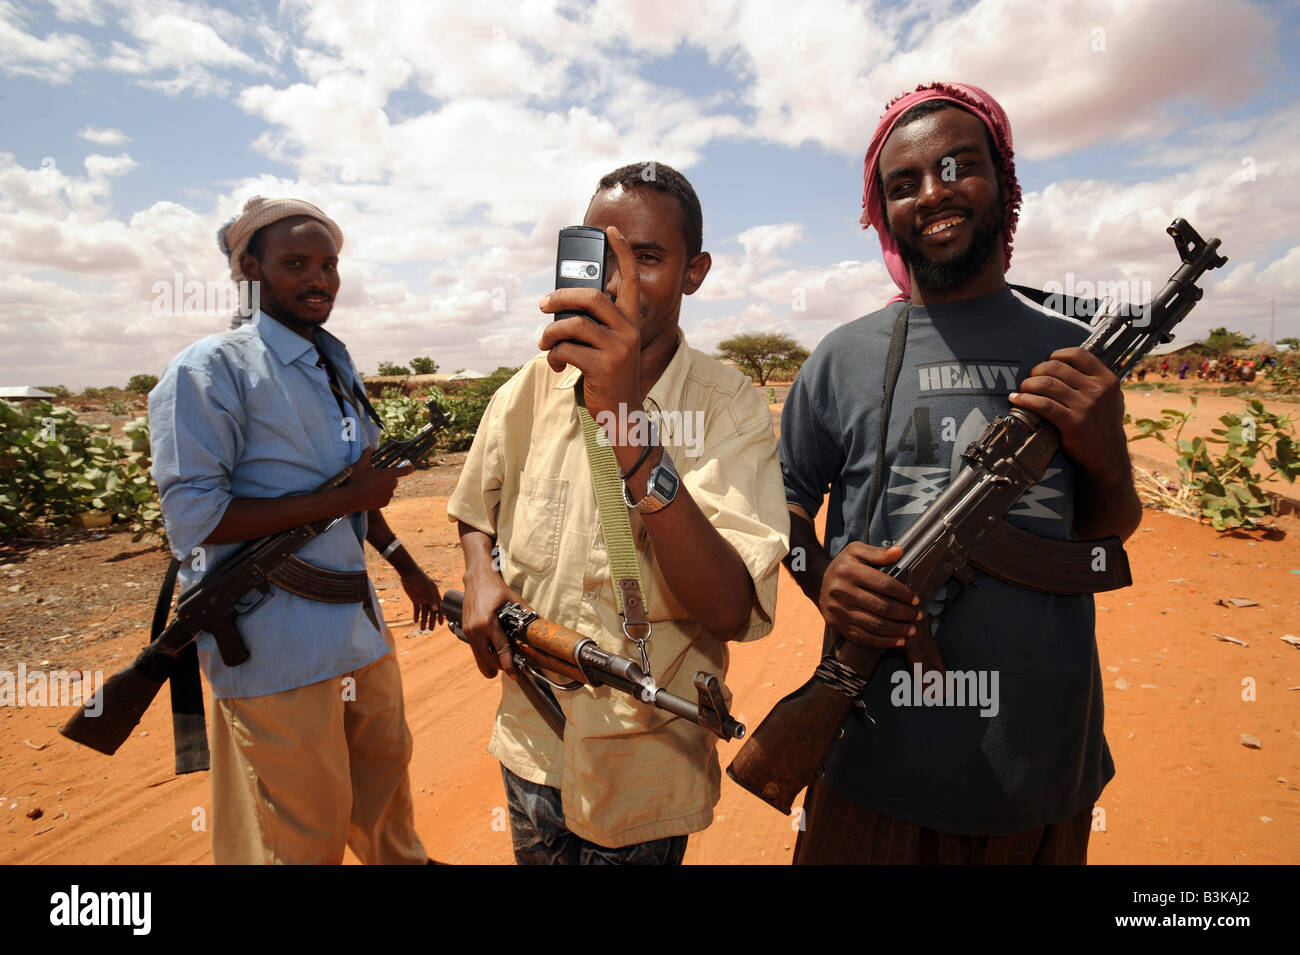 A Somali militia takes a picture with his mobile phone in the Somali town of Bulla Howa on the Somali Kenyan border 26 6 2008 Stock Photo